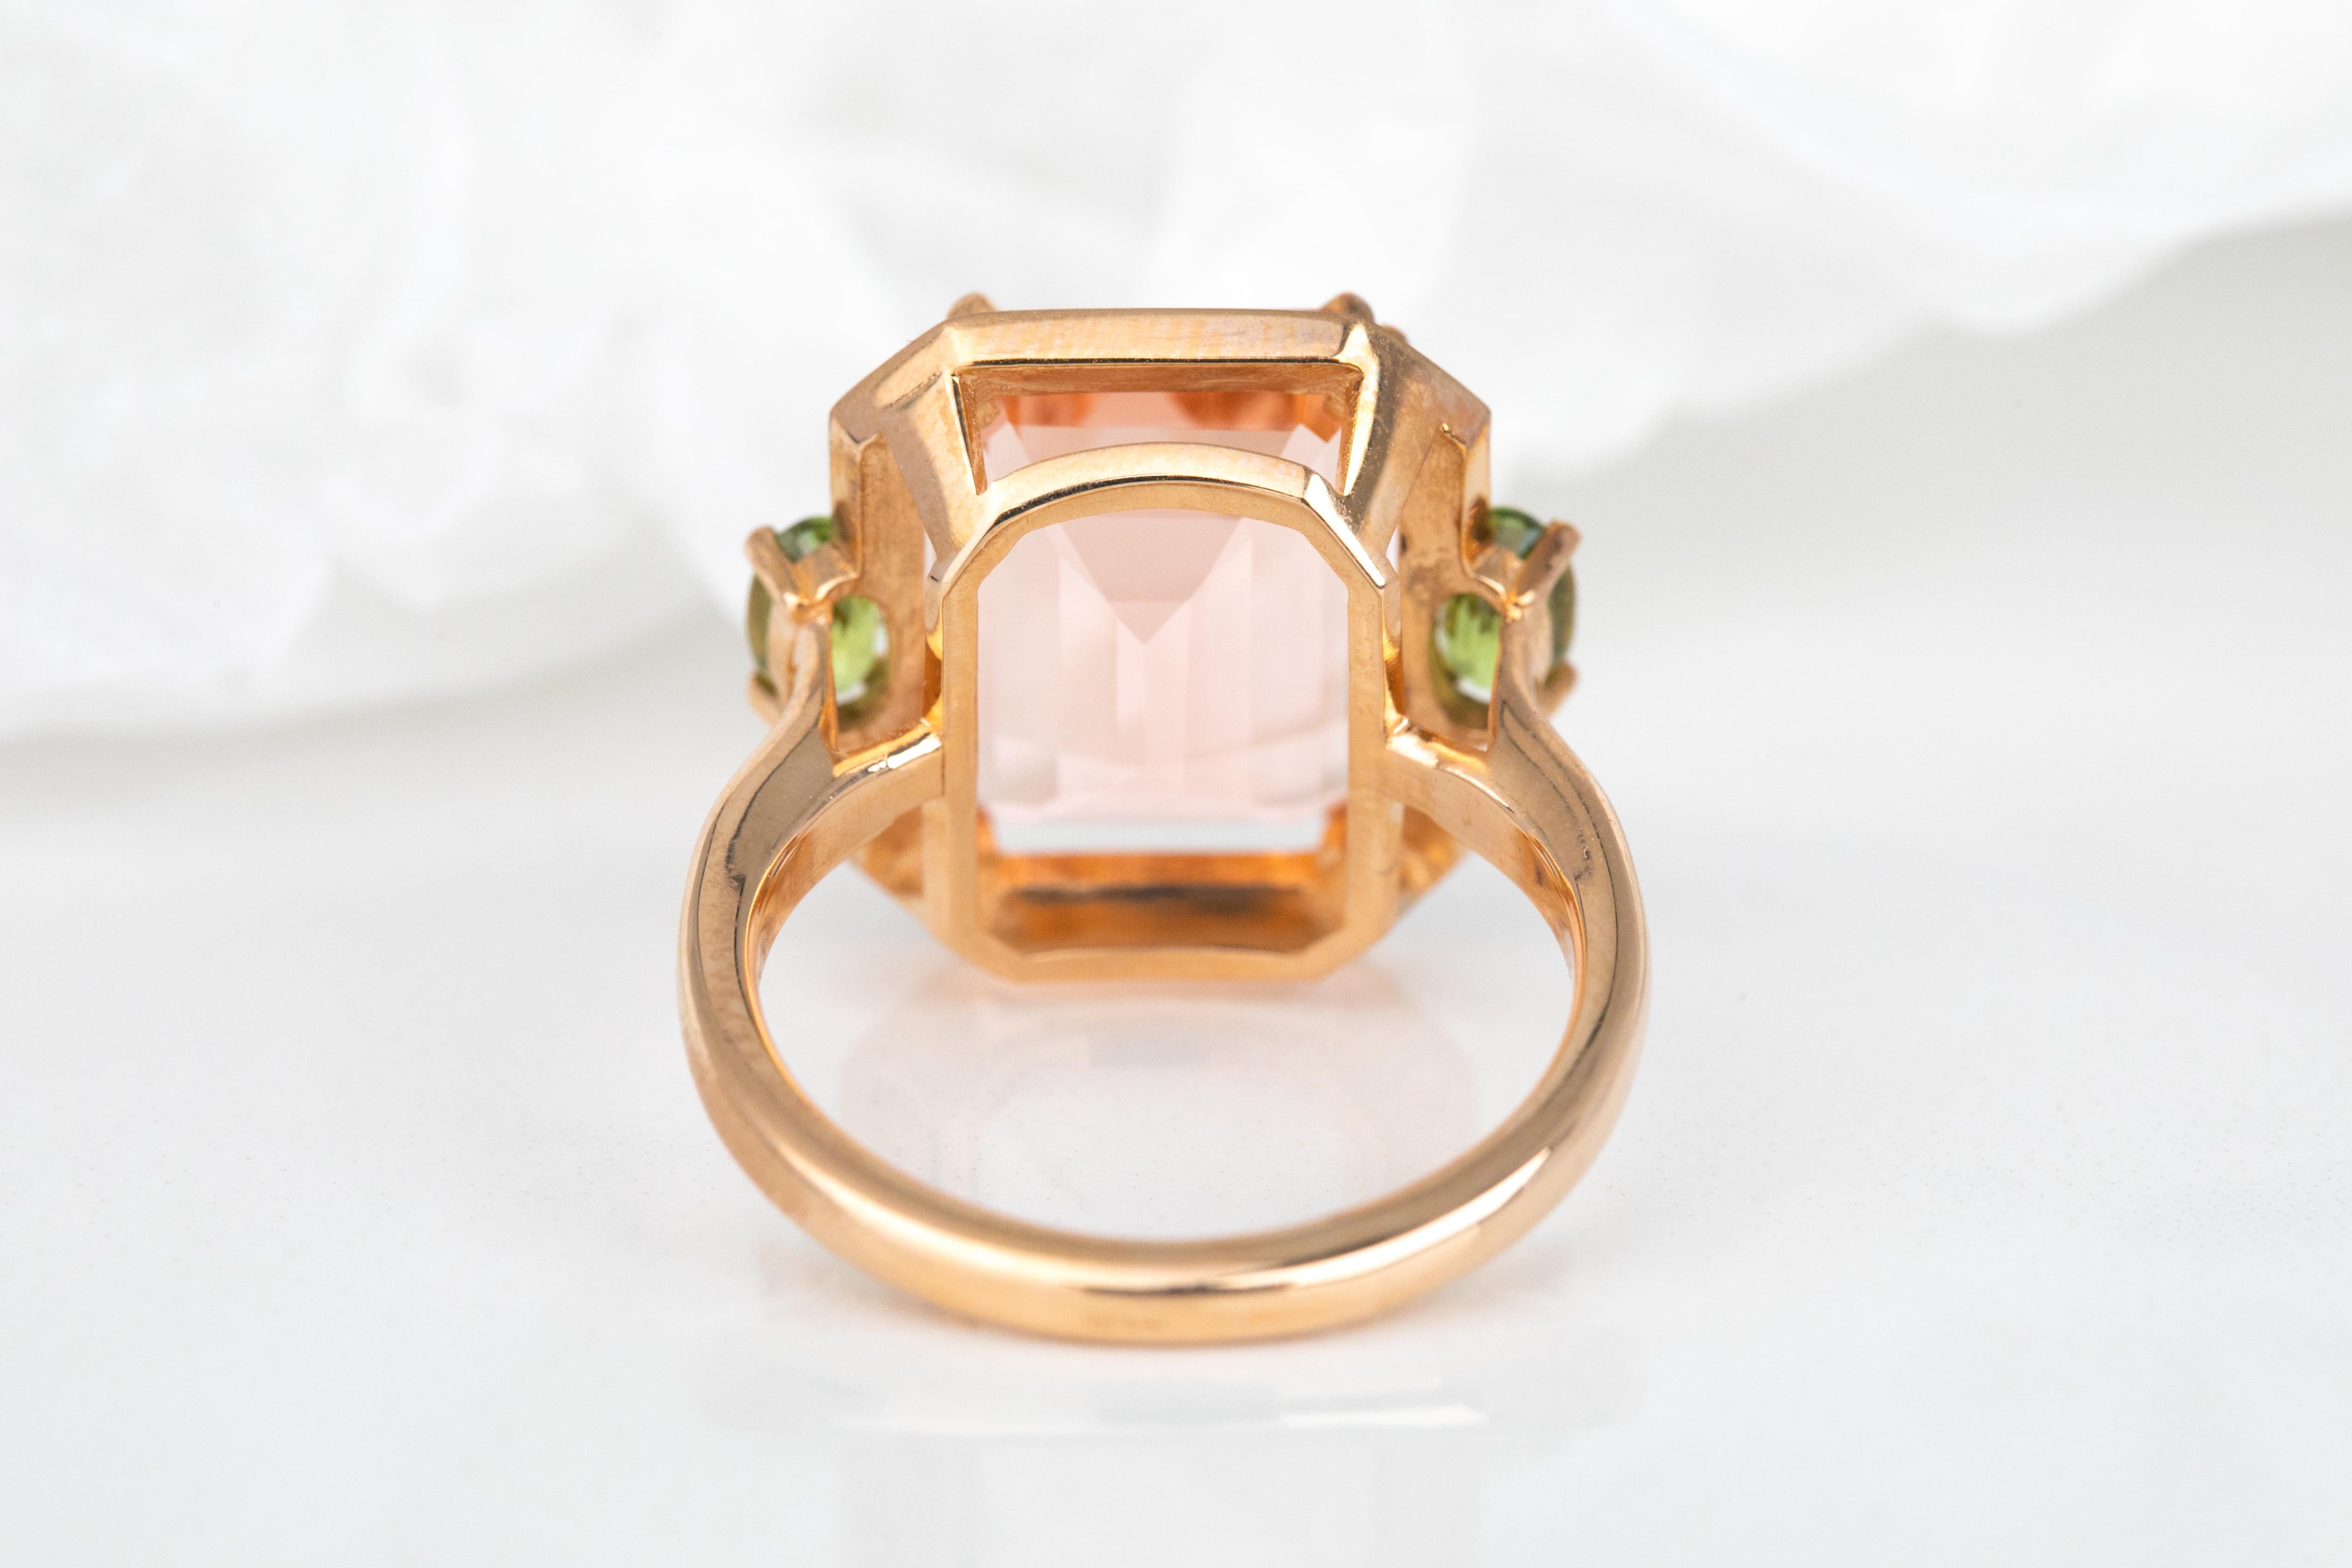 For Sale:  Art Deco Style Ring, 14k Gold Ring Pink Quartz and Pink Tourmaline Stone Ring 4